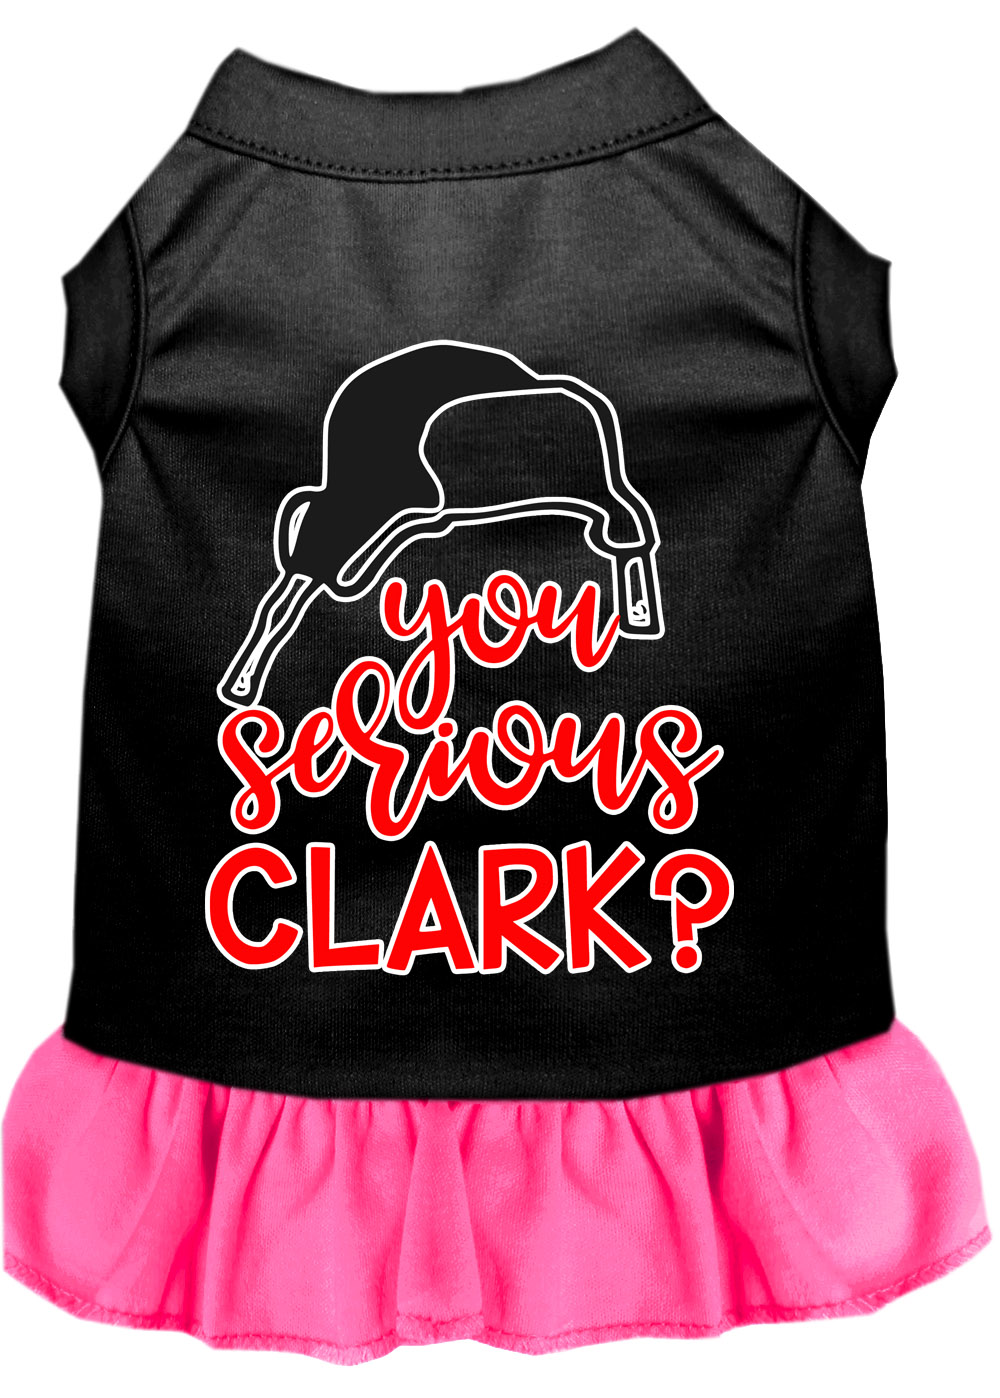 You Serious Clark? Screen Print Dog Dress Black with Bright Pink Med